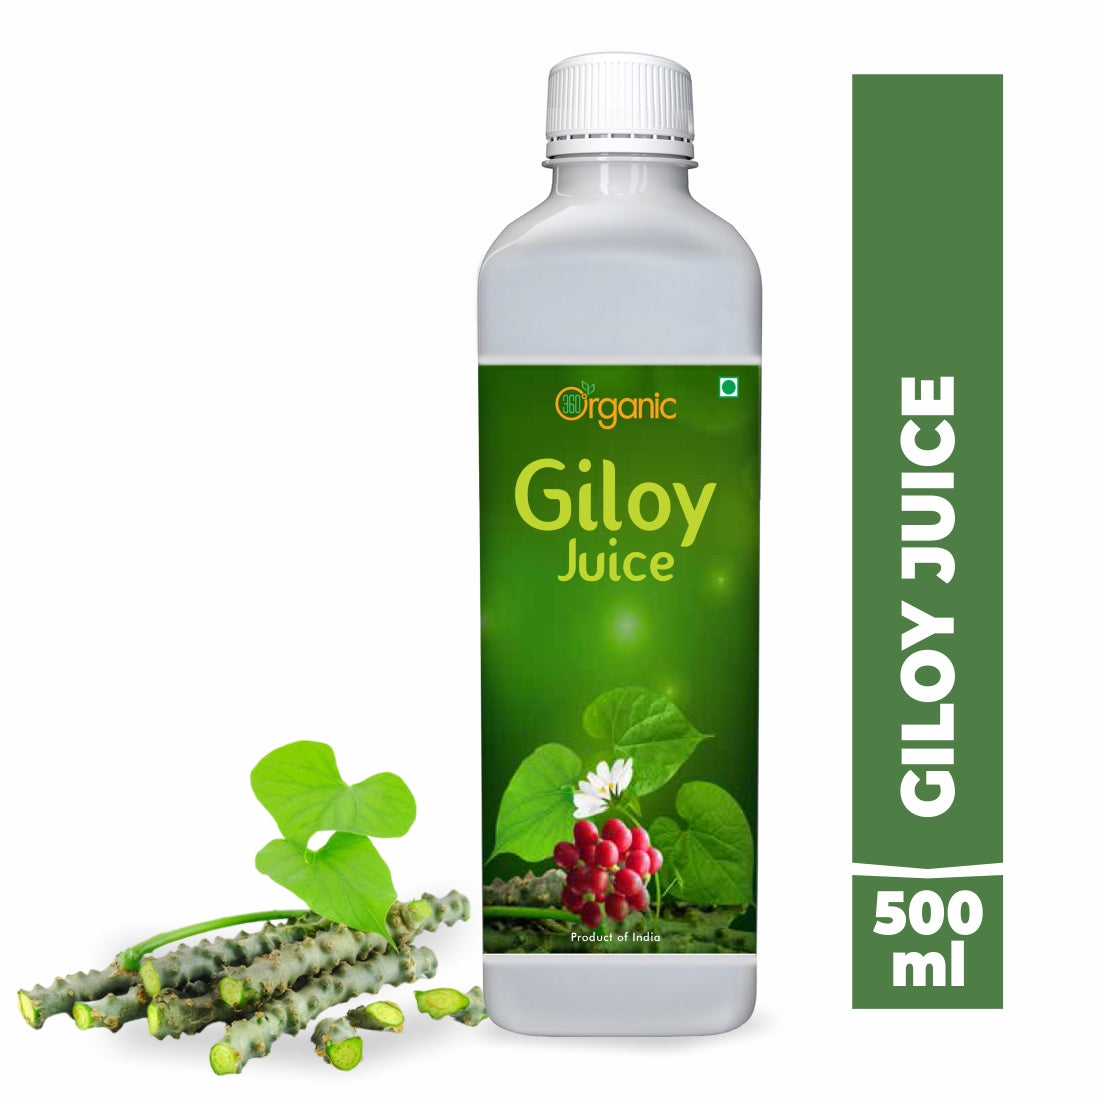 360 Degree Organic Giloy Juice for Boosts Immunity | Improves Digestion | Reduces Stress and Anxiety | Reduces Signs Of Aging - 500 ml